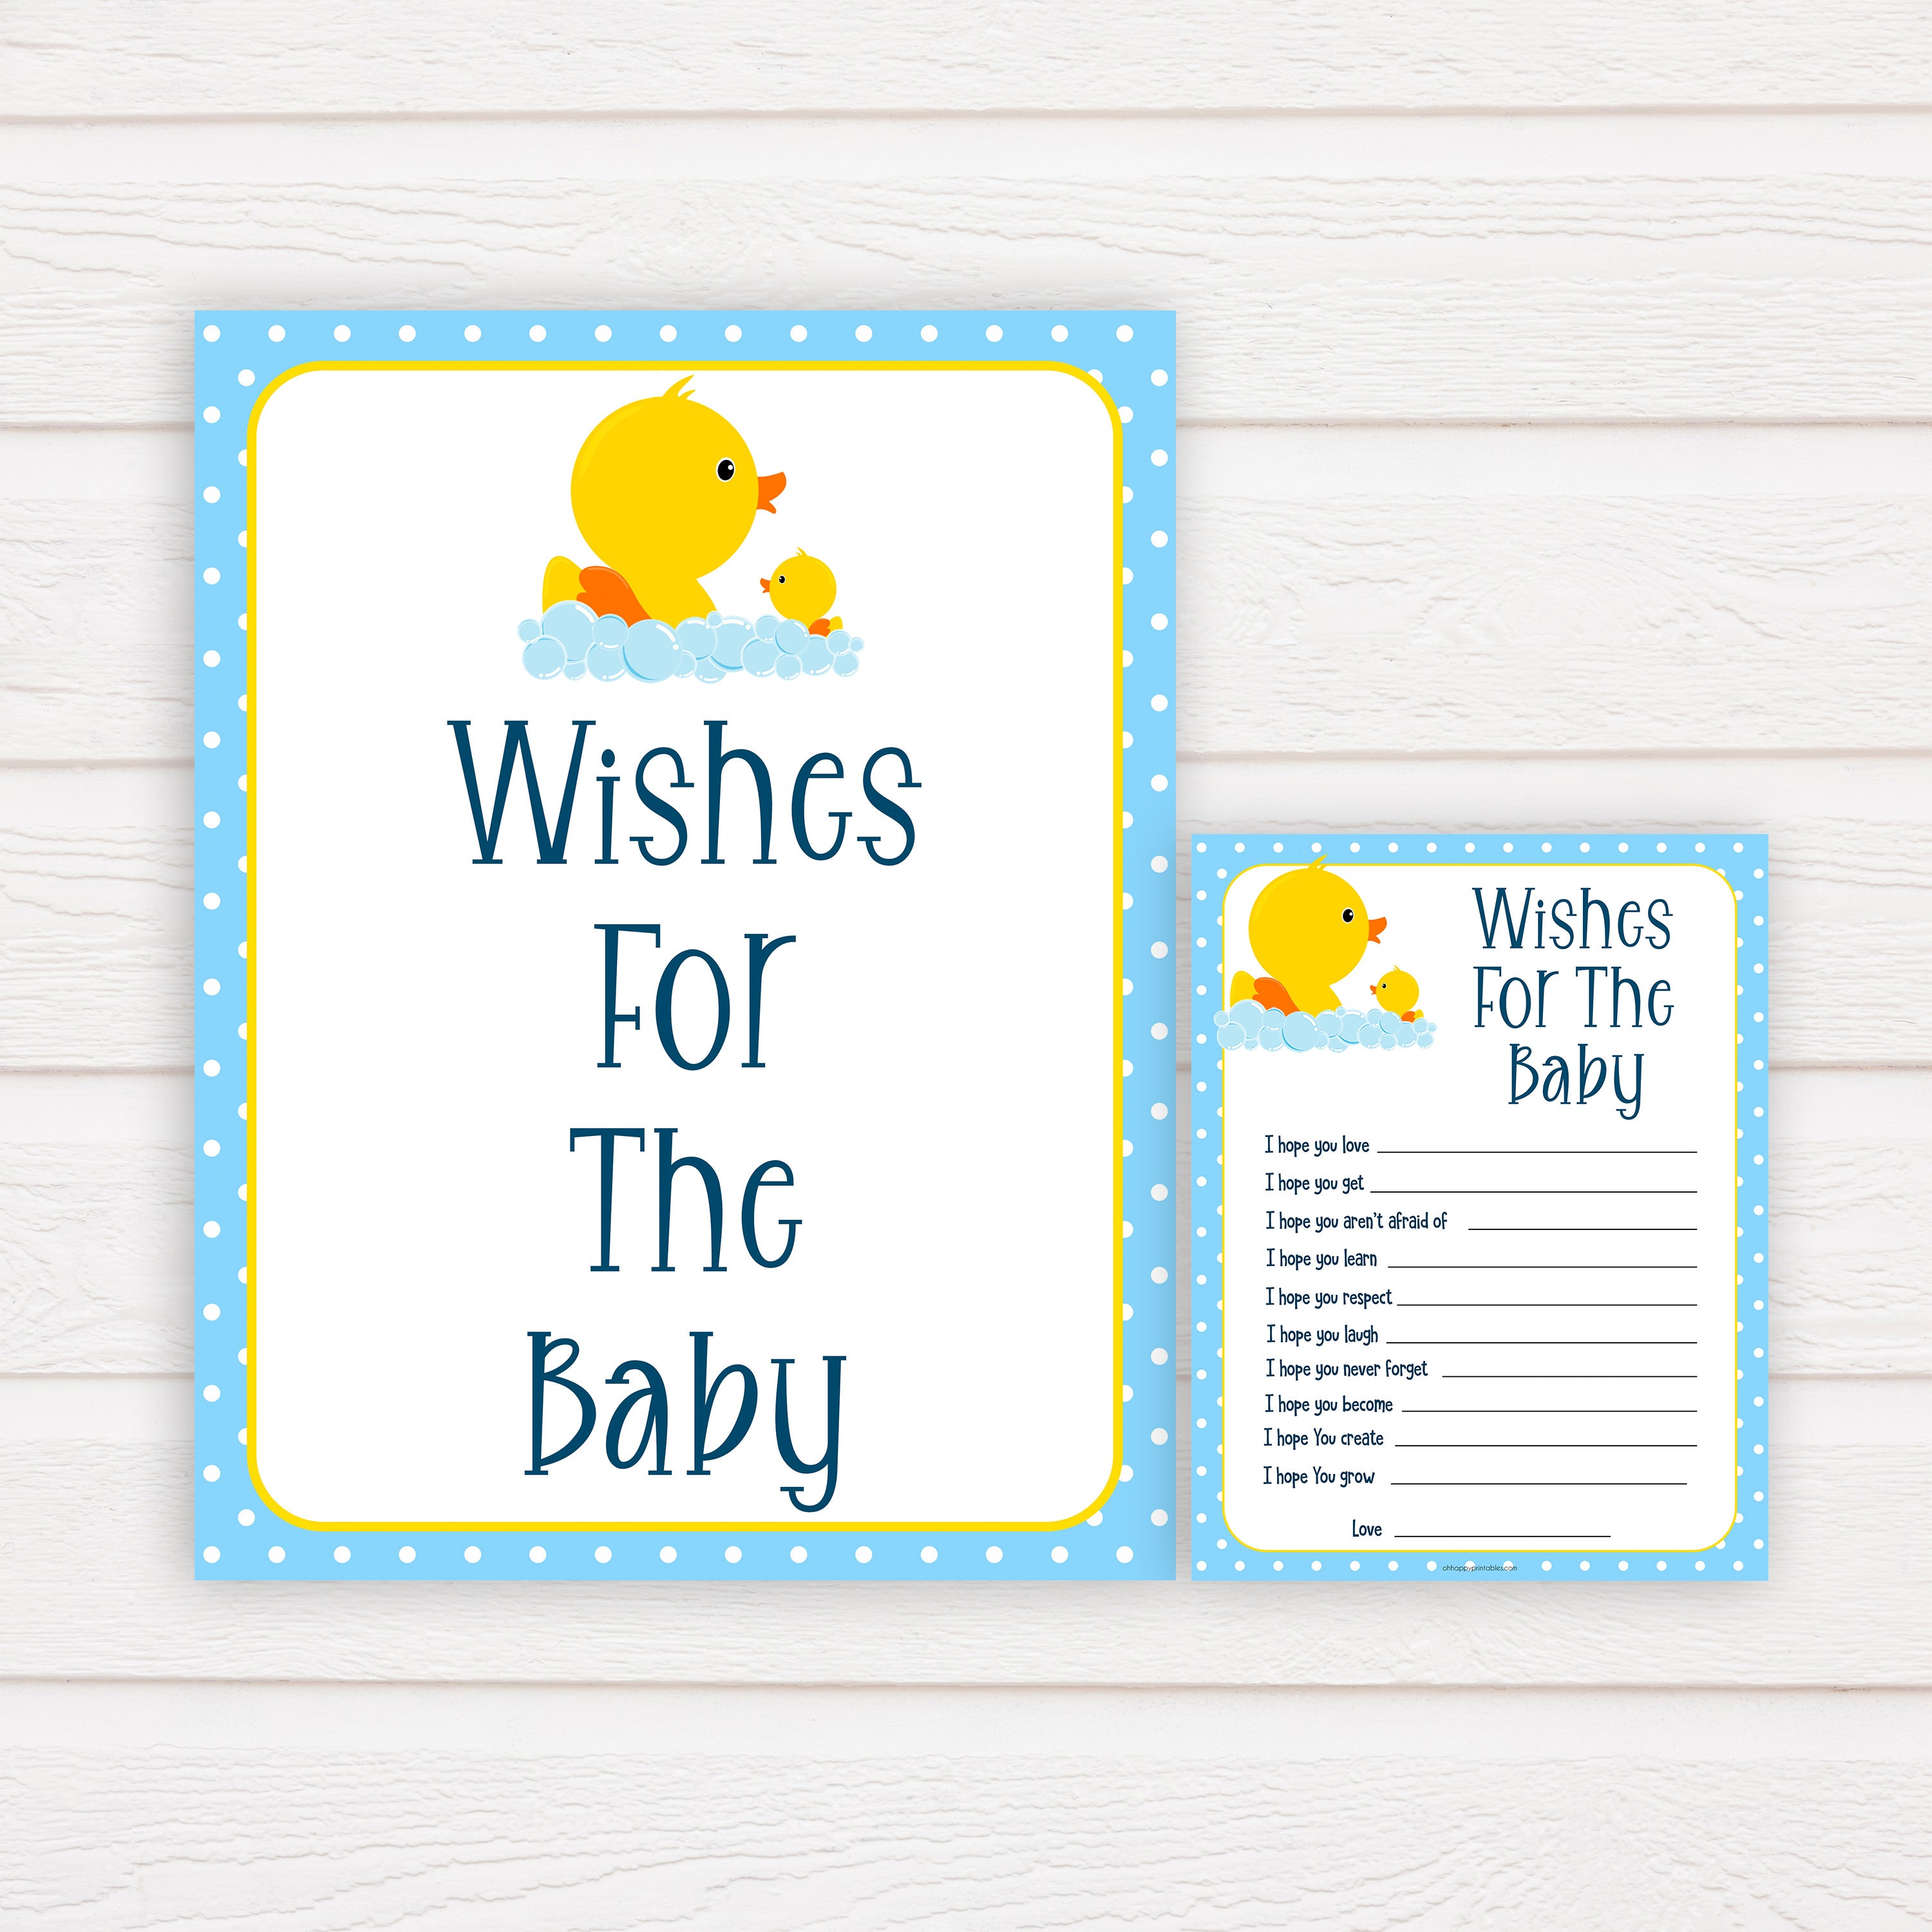 rubber ducky baby games, wishes for the baby baby game, printable baby games, baby shower games, rubber ducky baby theme, fun baby games, popular baby games